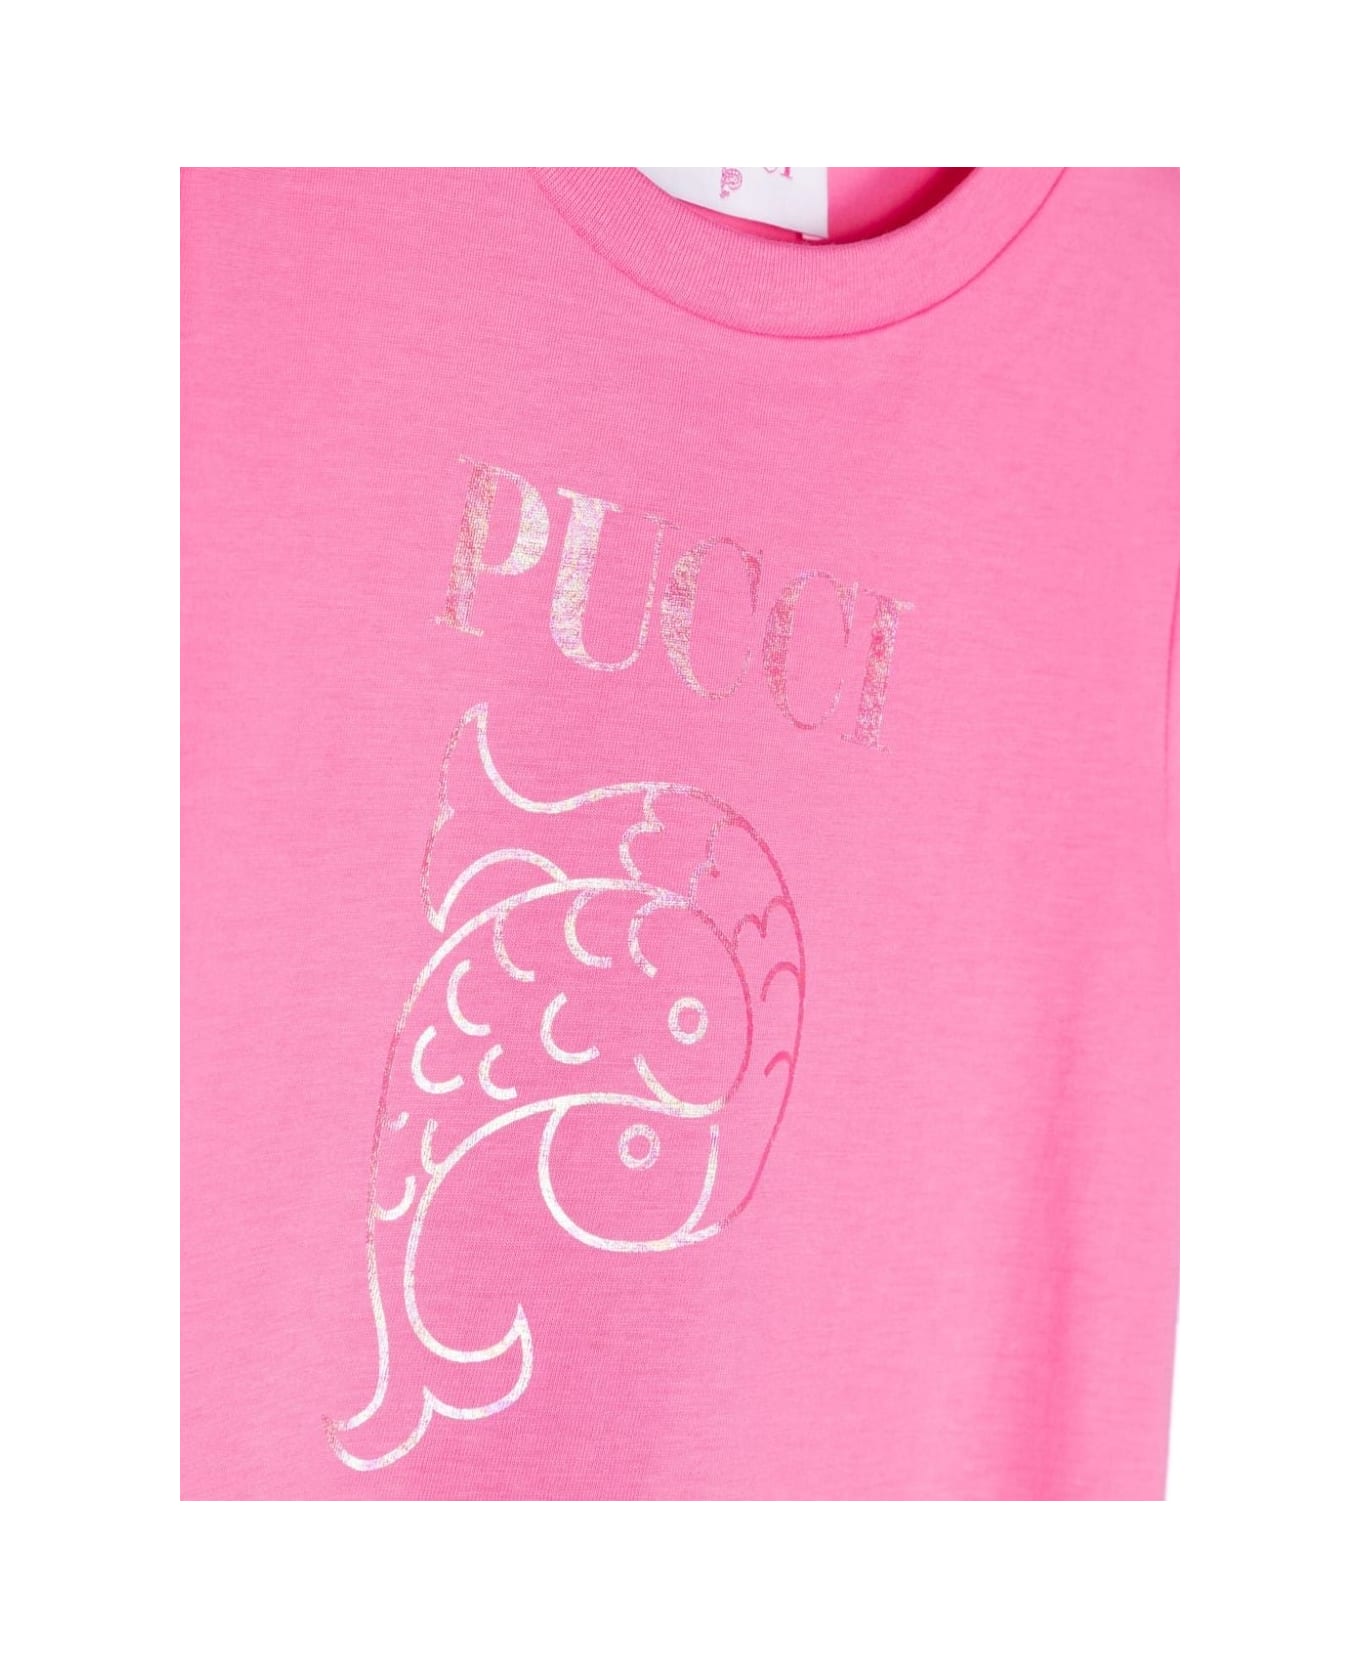 Pucci Fuchsia T-shirt With Pucci P Print - Pink Tシャツ＆ポロシャツ